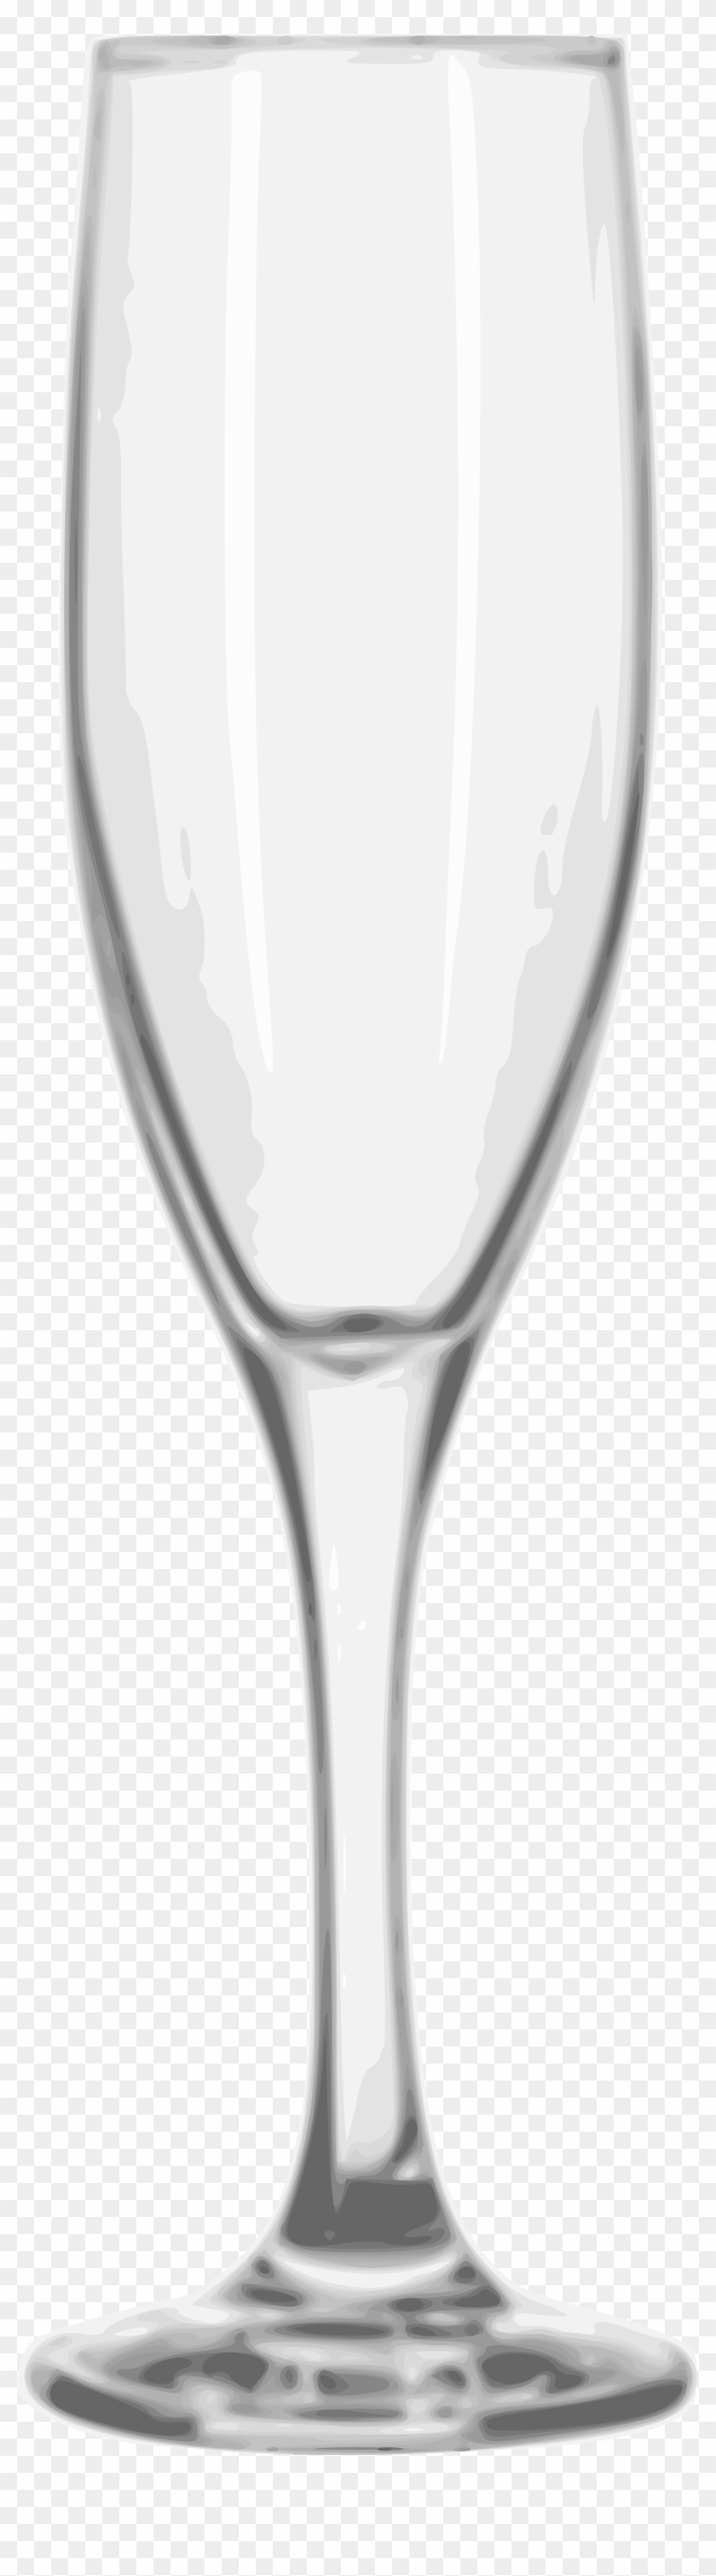 Open - Champagne Glass Transparent Png Clipart #1022887